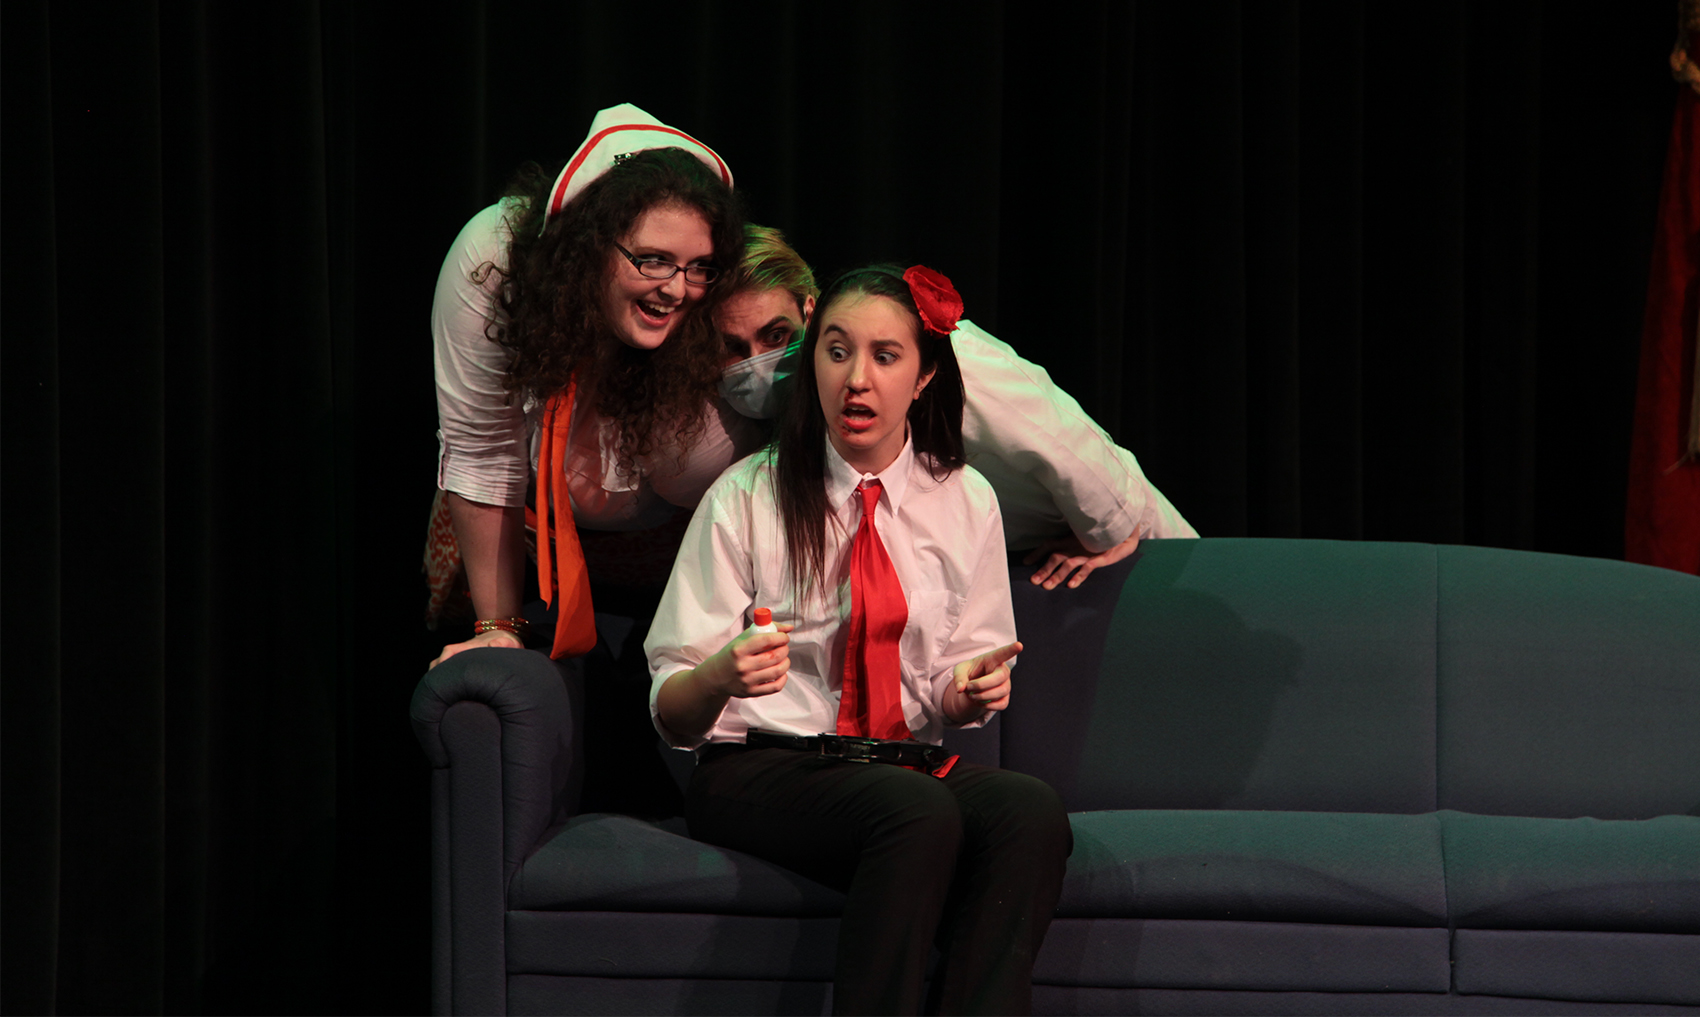 A young woman sits on a couch, with a red tie. Looming behind her is a girl with an orange tie and a young man with a face mask on. They both look intensely at the young woman with the red tie who is startled and looks afraid. Her nose is bleeding and she holds a small white vial with a red cap.  